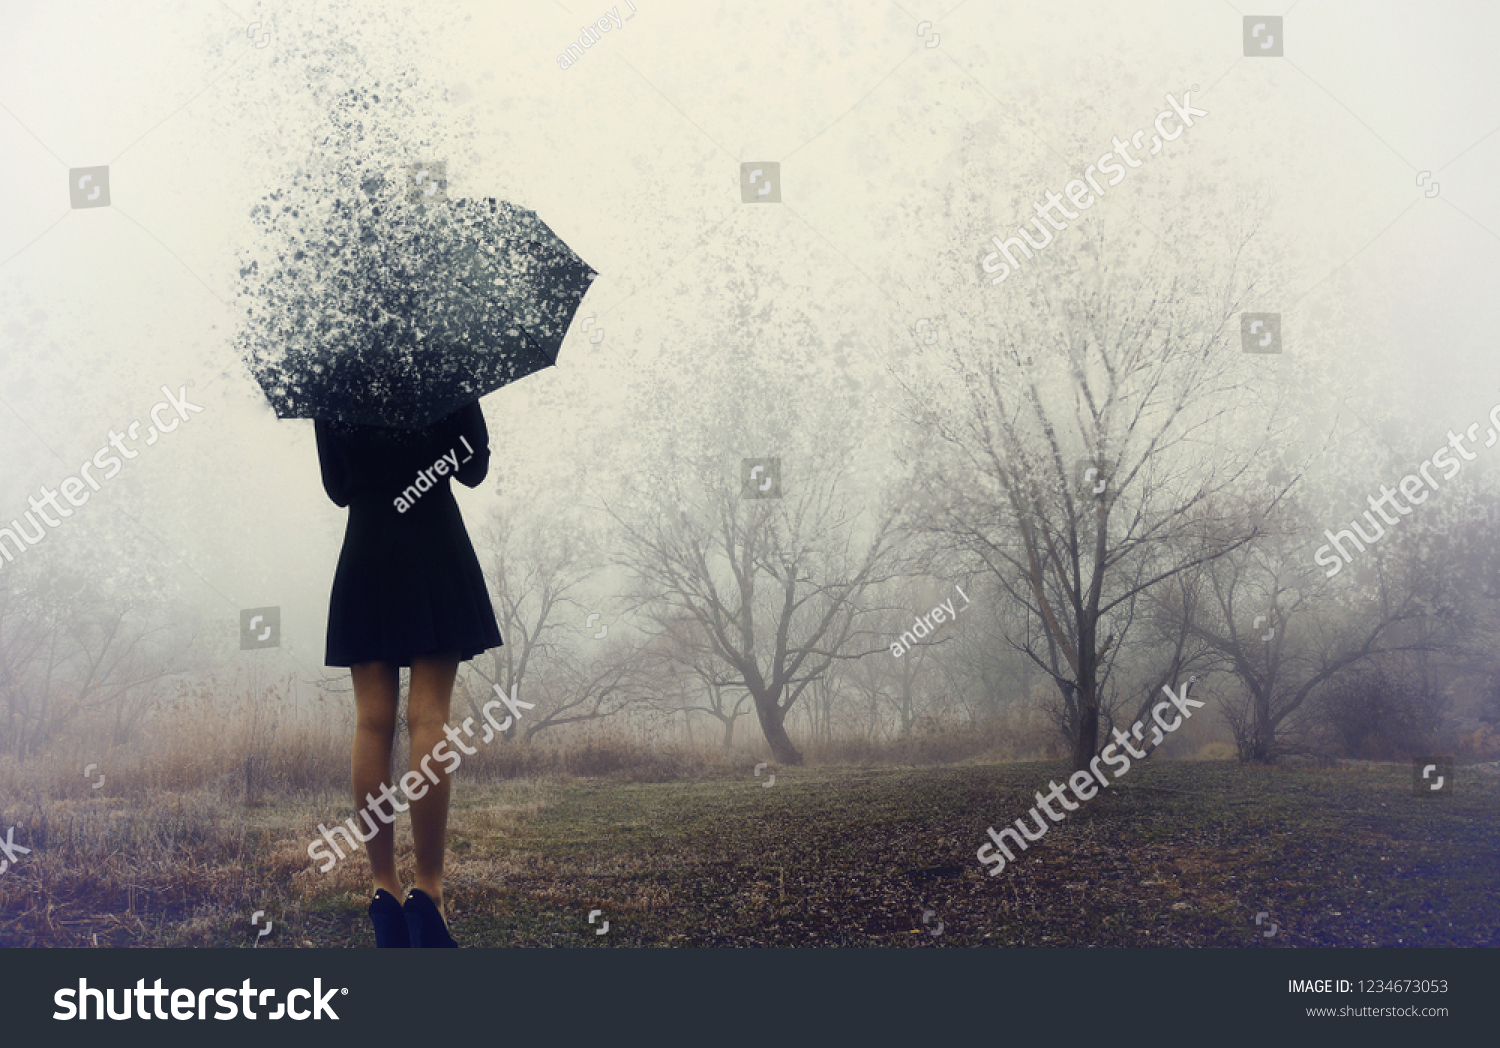 Girl with umbrella standing on the field with trees.